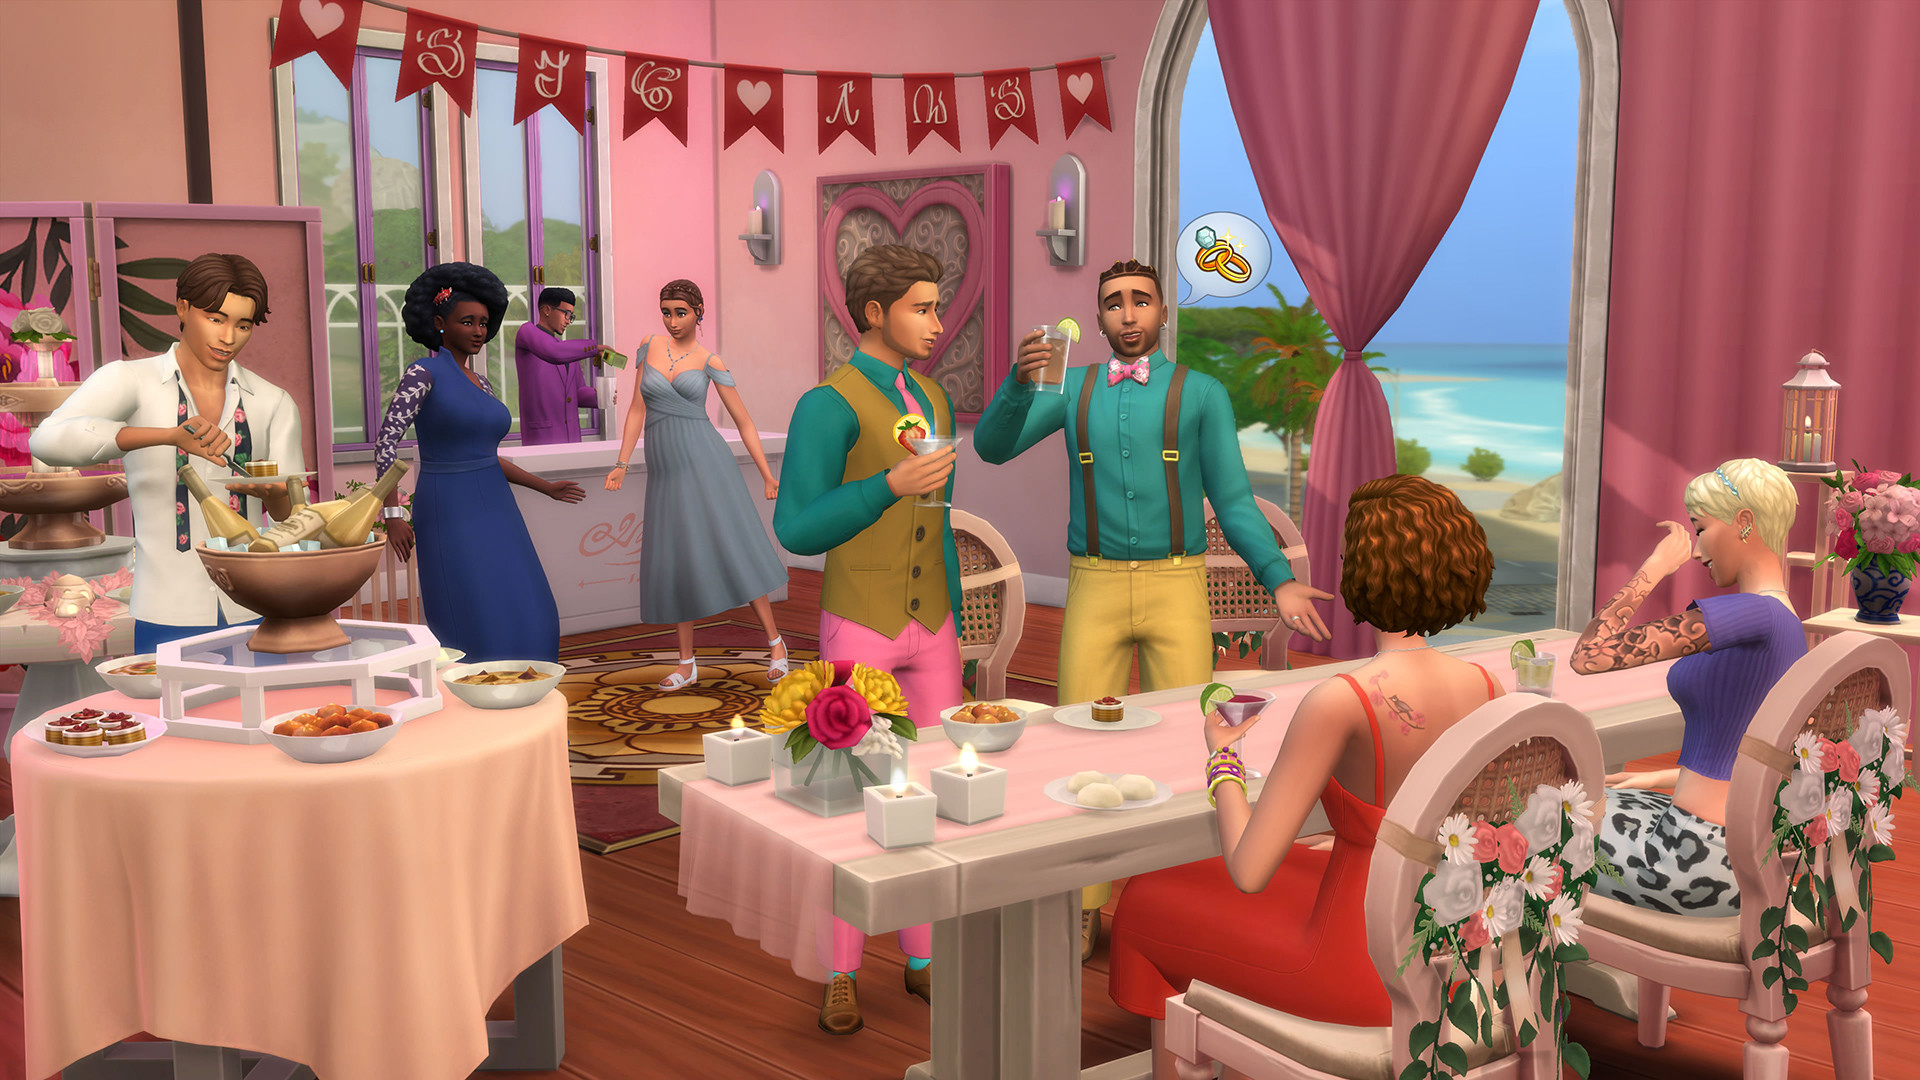 The Sims 4 - My Wedding Stories Game Pack DLC Steam Altergift, $25.82